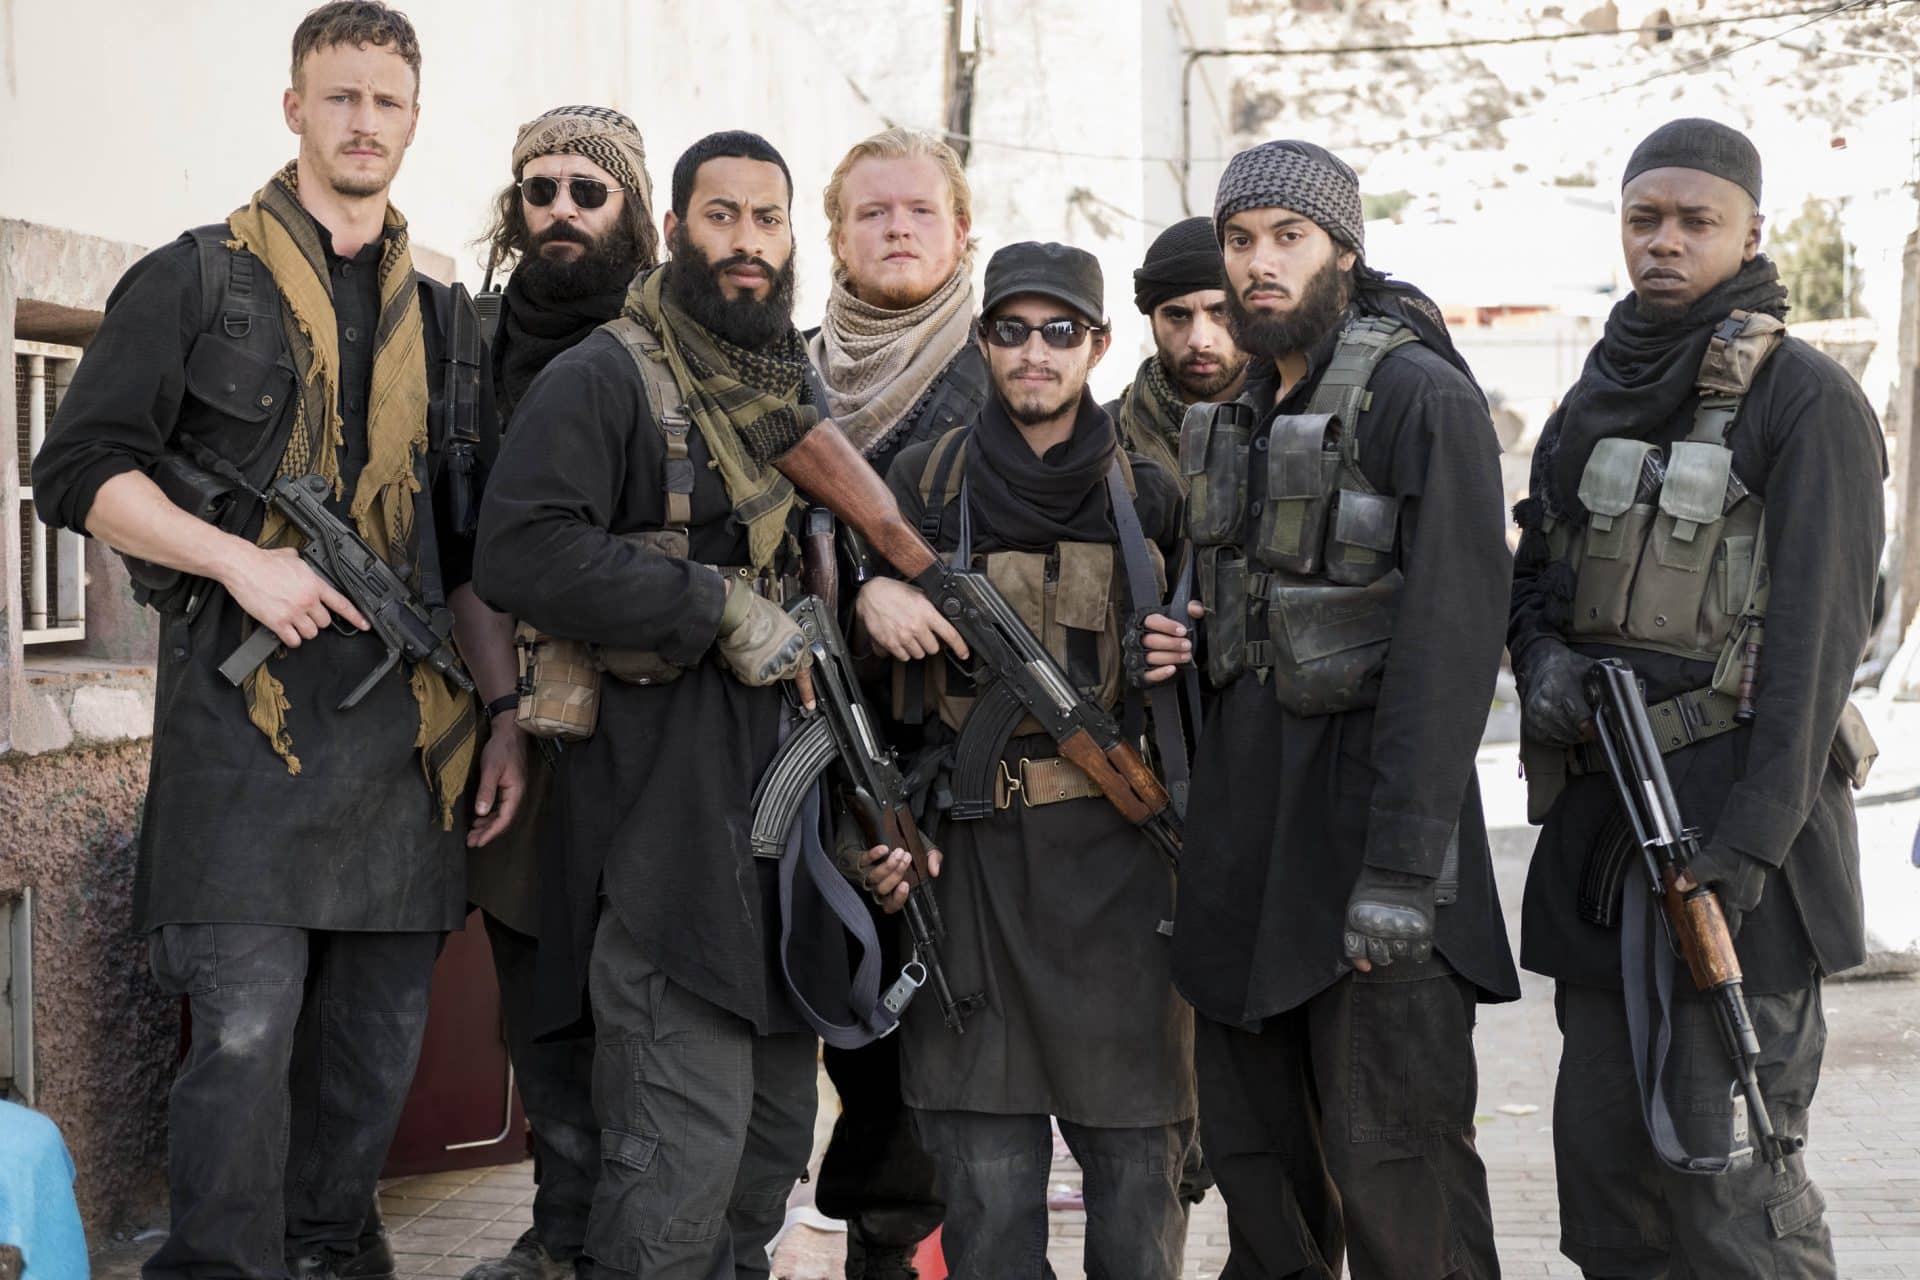 ISIS: Le reclute del male – su National Geographic la miniserie sui foreign fighters